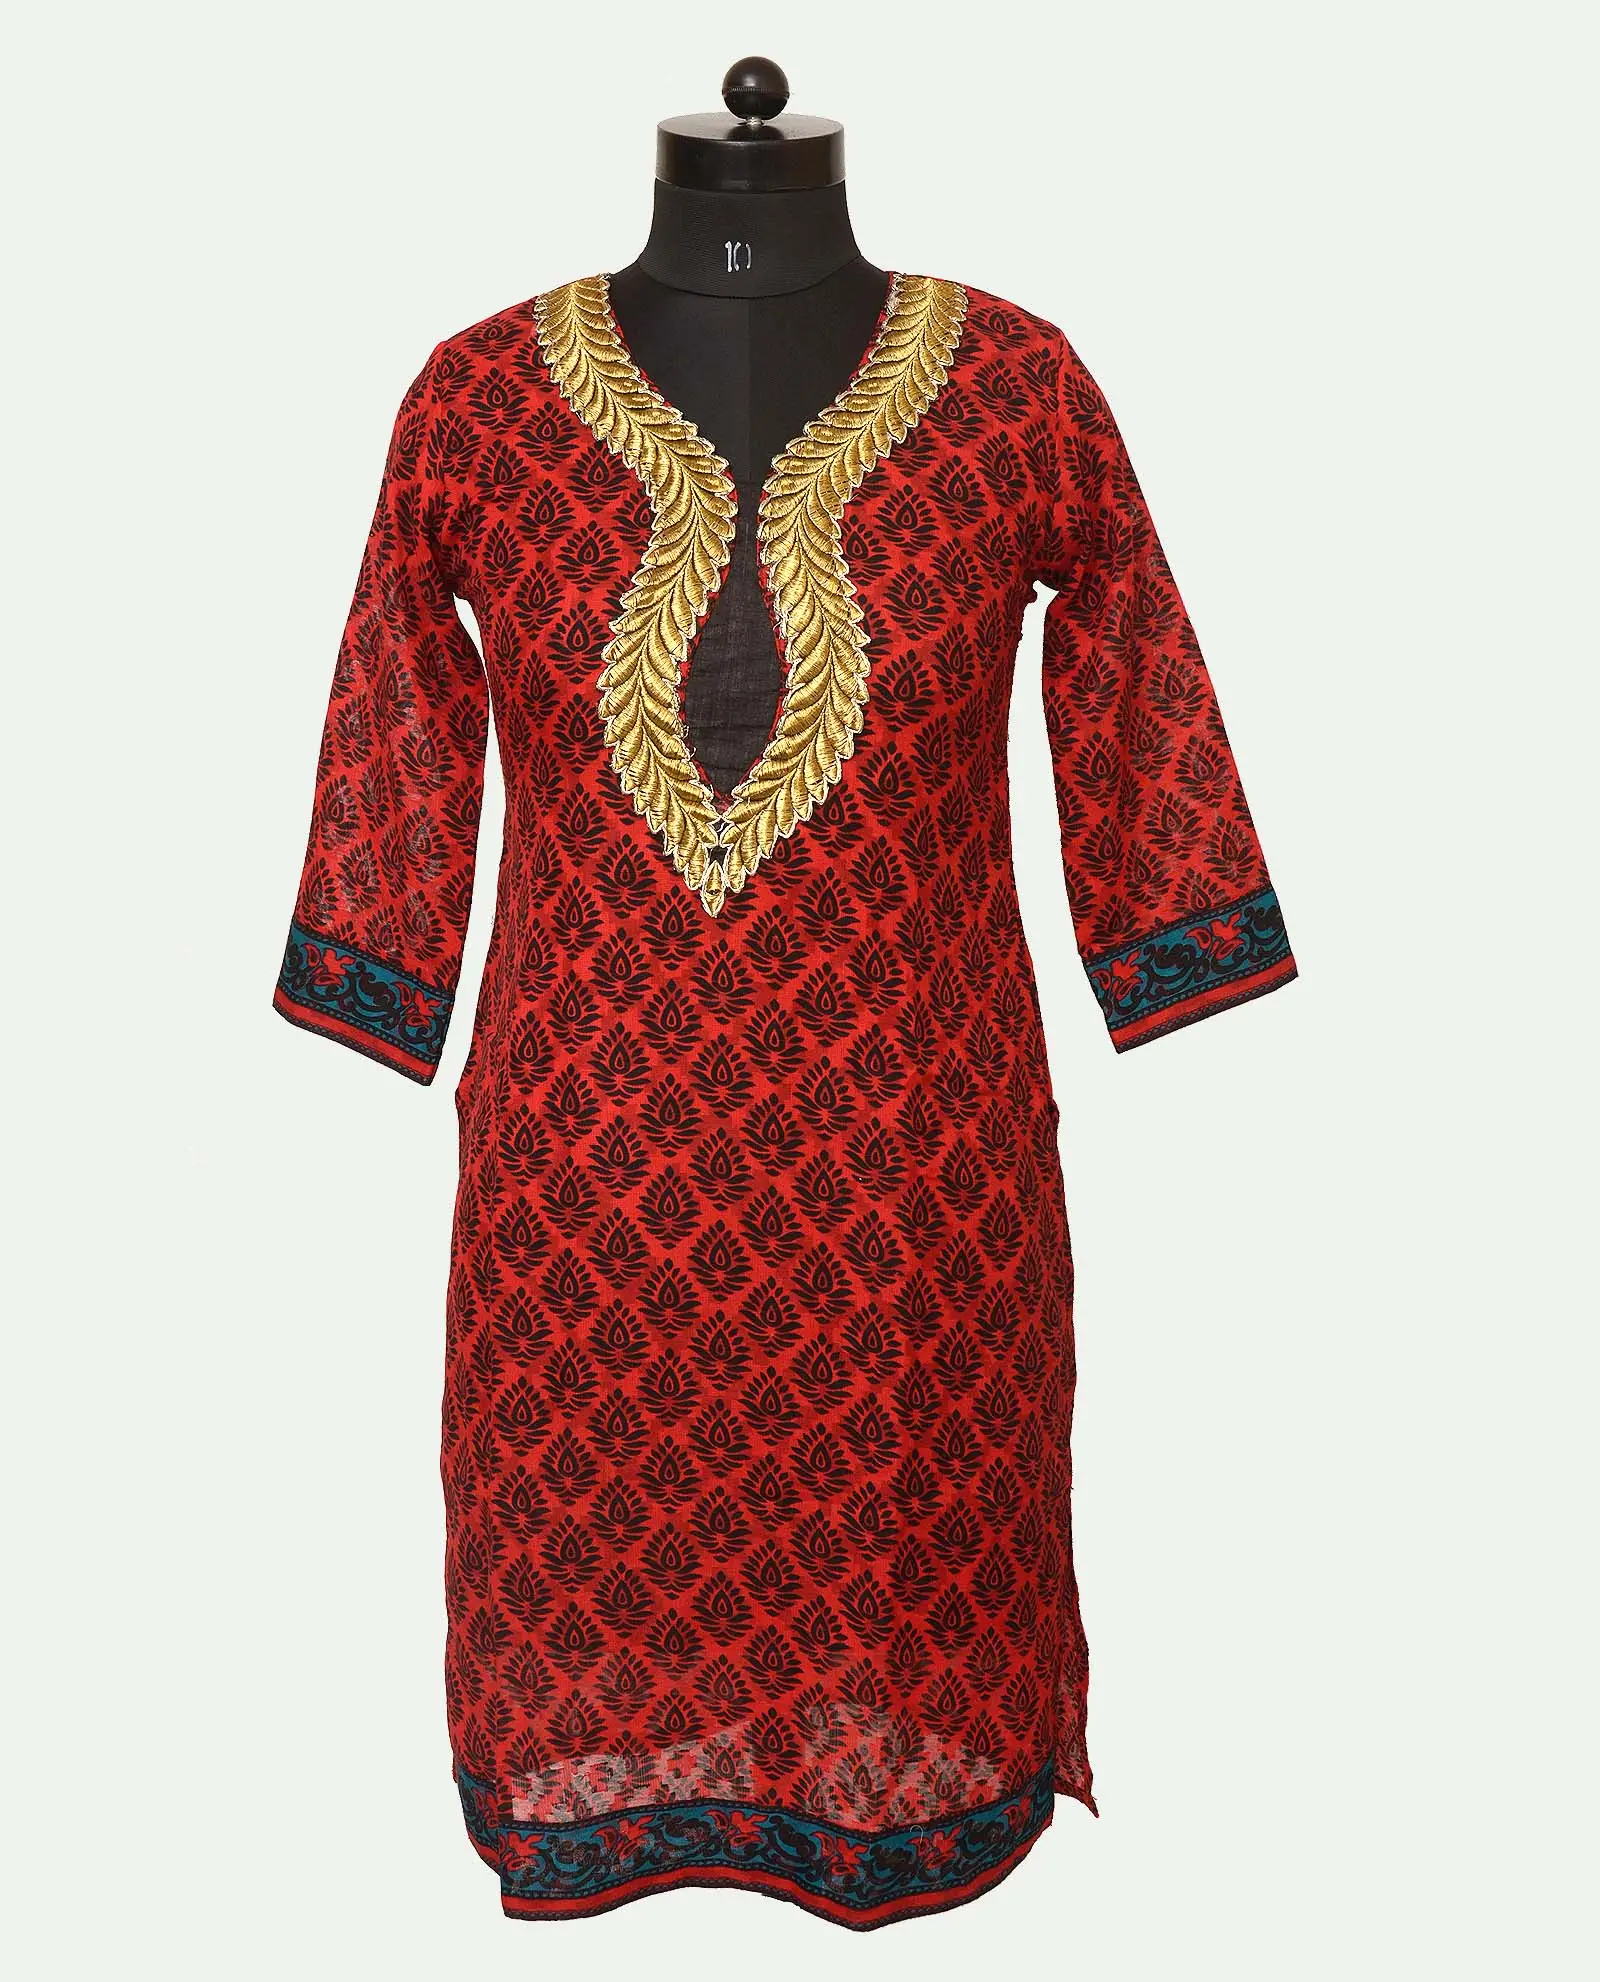 Beautiful Machine Embroidery neck design Cotton printed Kurtis with Zari Embroidery Neck manufacturer and supplier from India